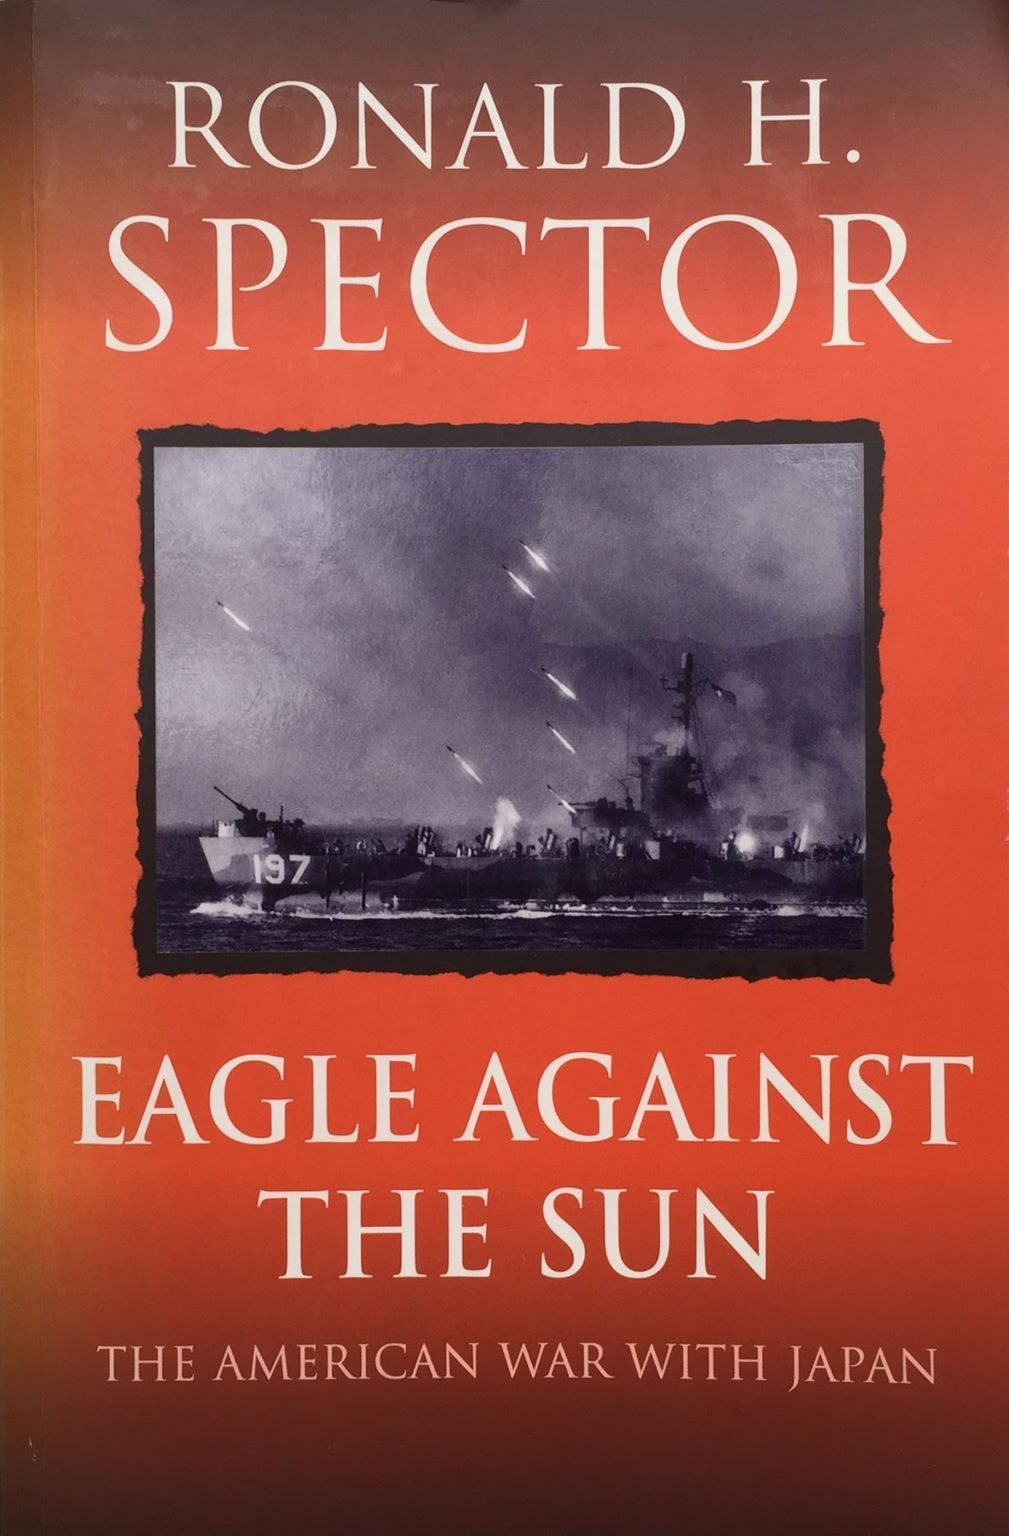 EAGLE AGAINST THE SUN: The American War with Japan